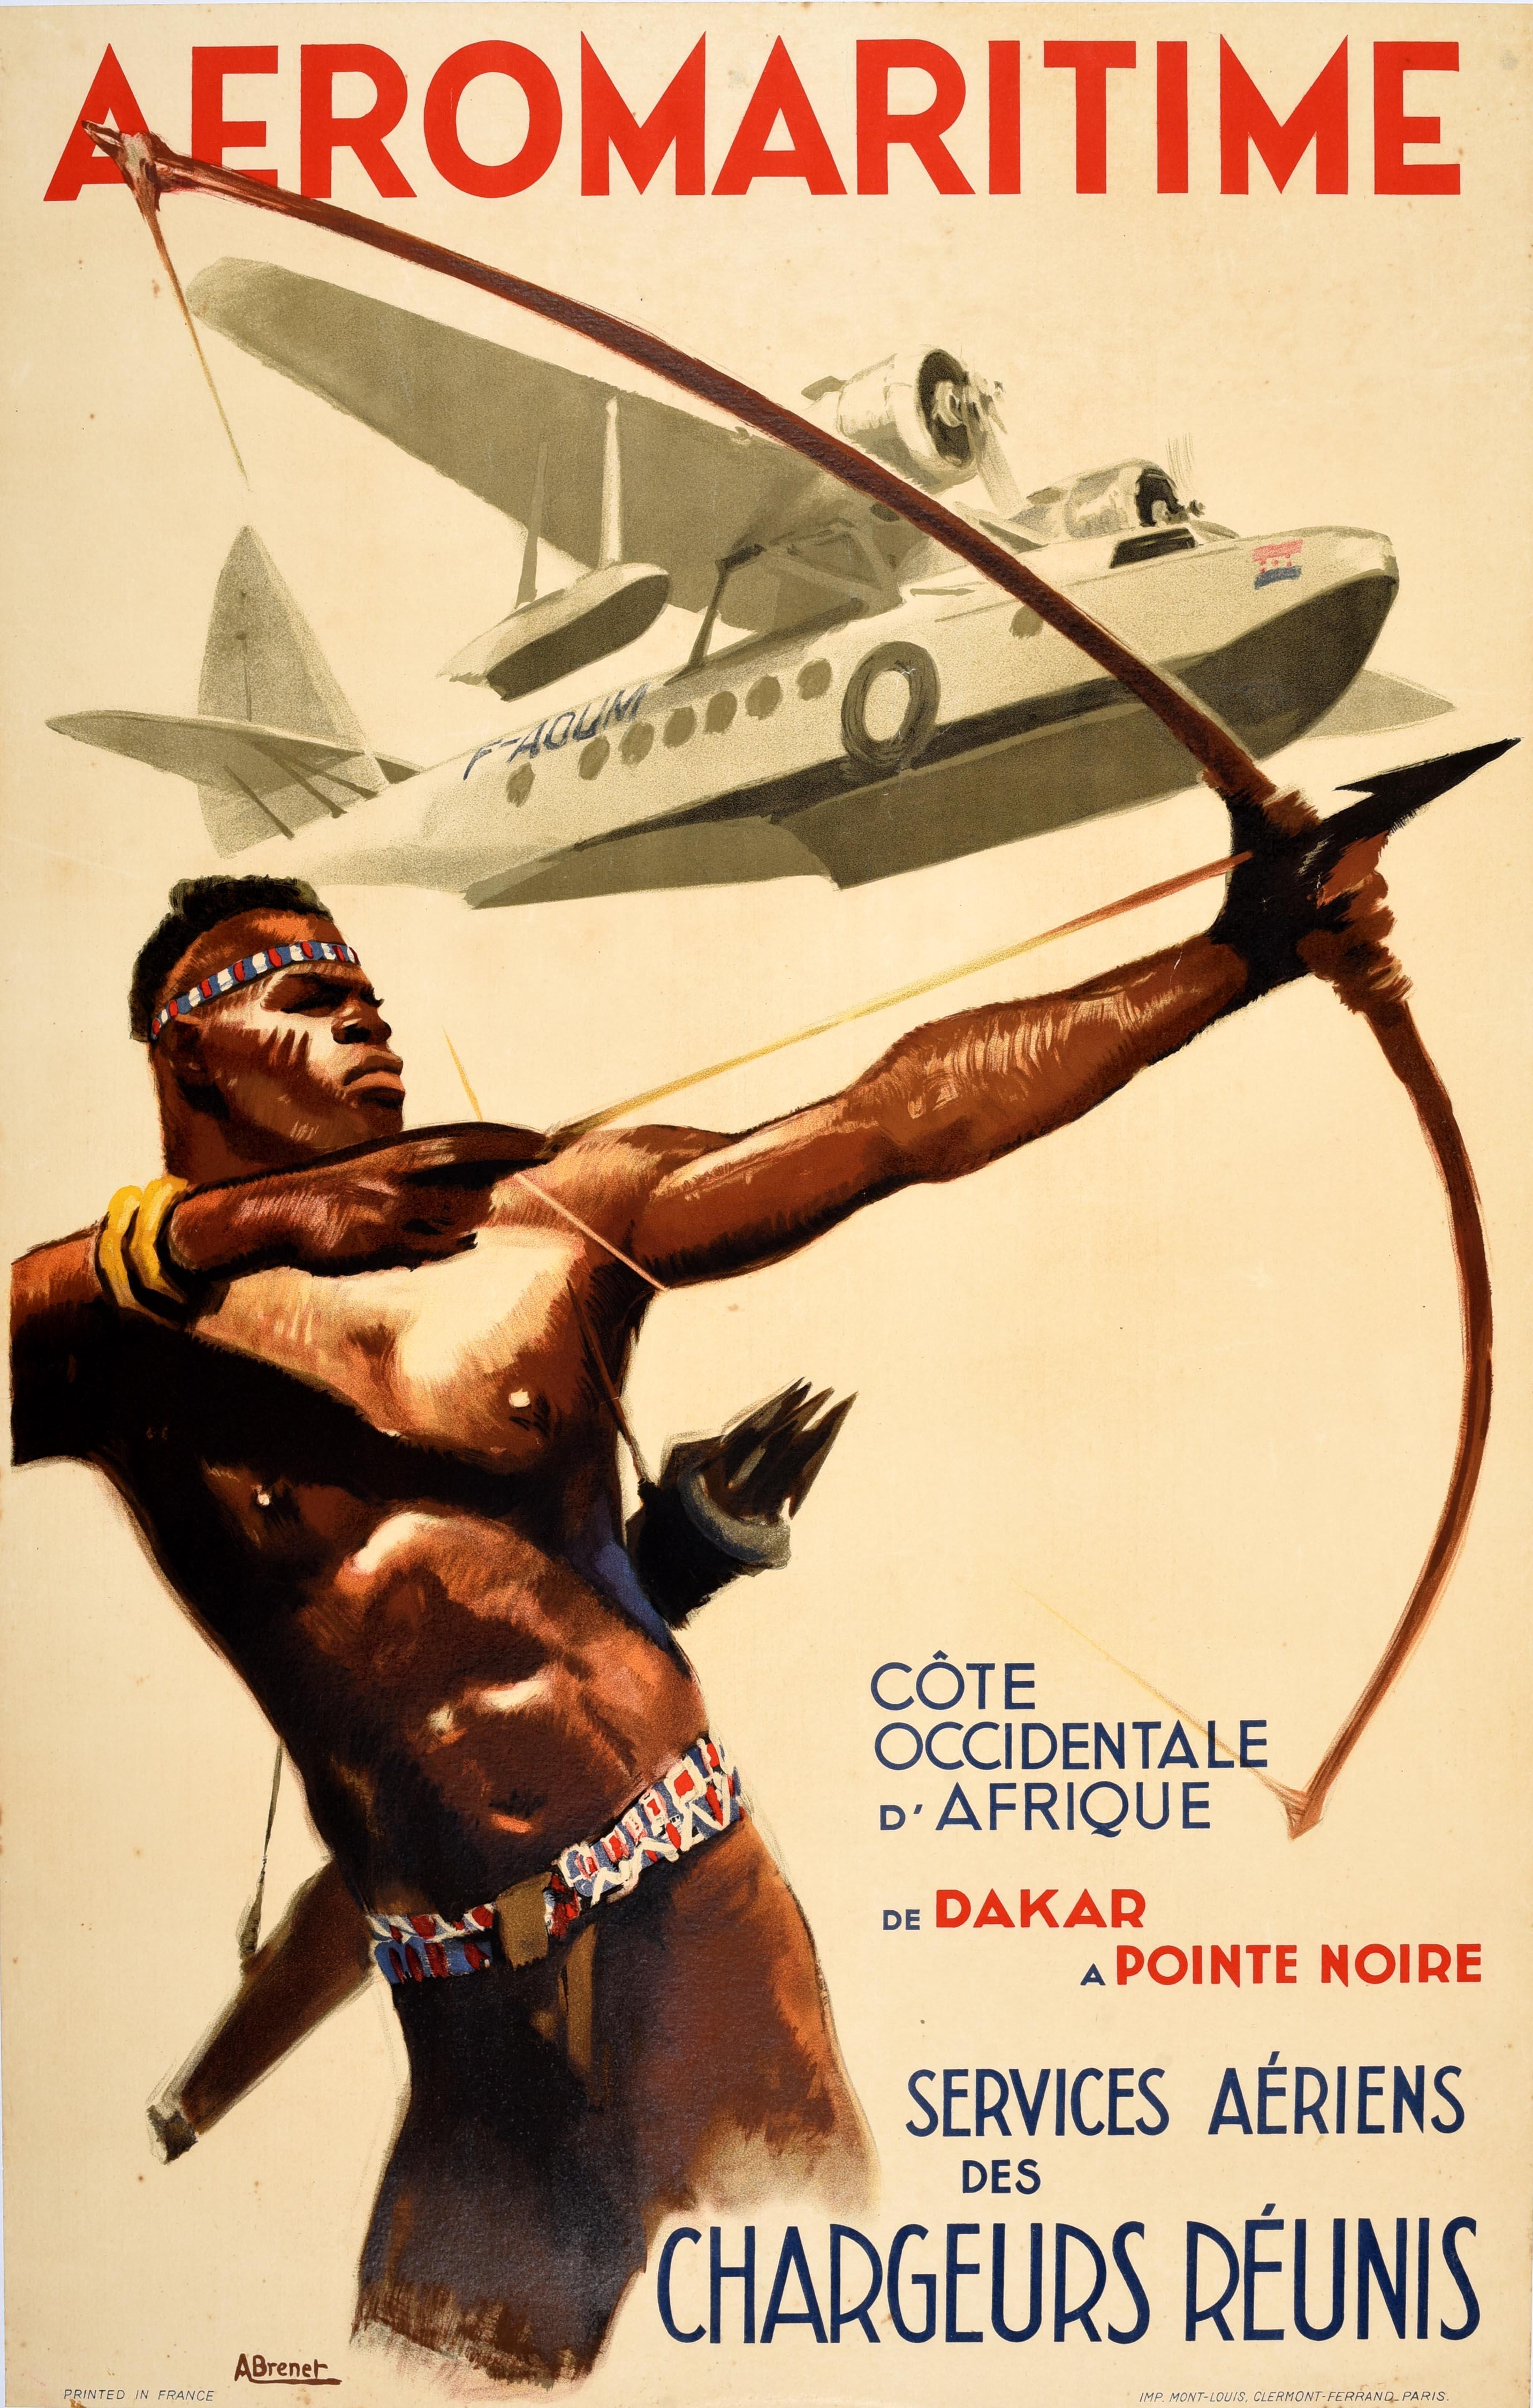 Original vintage travel poster for Aeromaritime - to the West coast of Africa, from Dakar in Senegal to Pointe Noire - Design by Albert Brenet (1903-2005) features an African Tribesman shooting a bow and arrow with a propellor plane flying in the